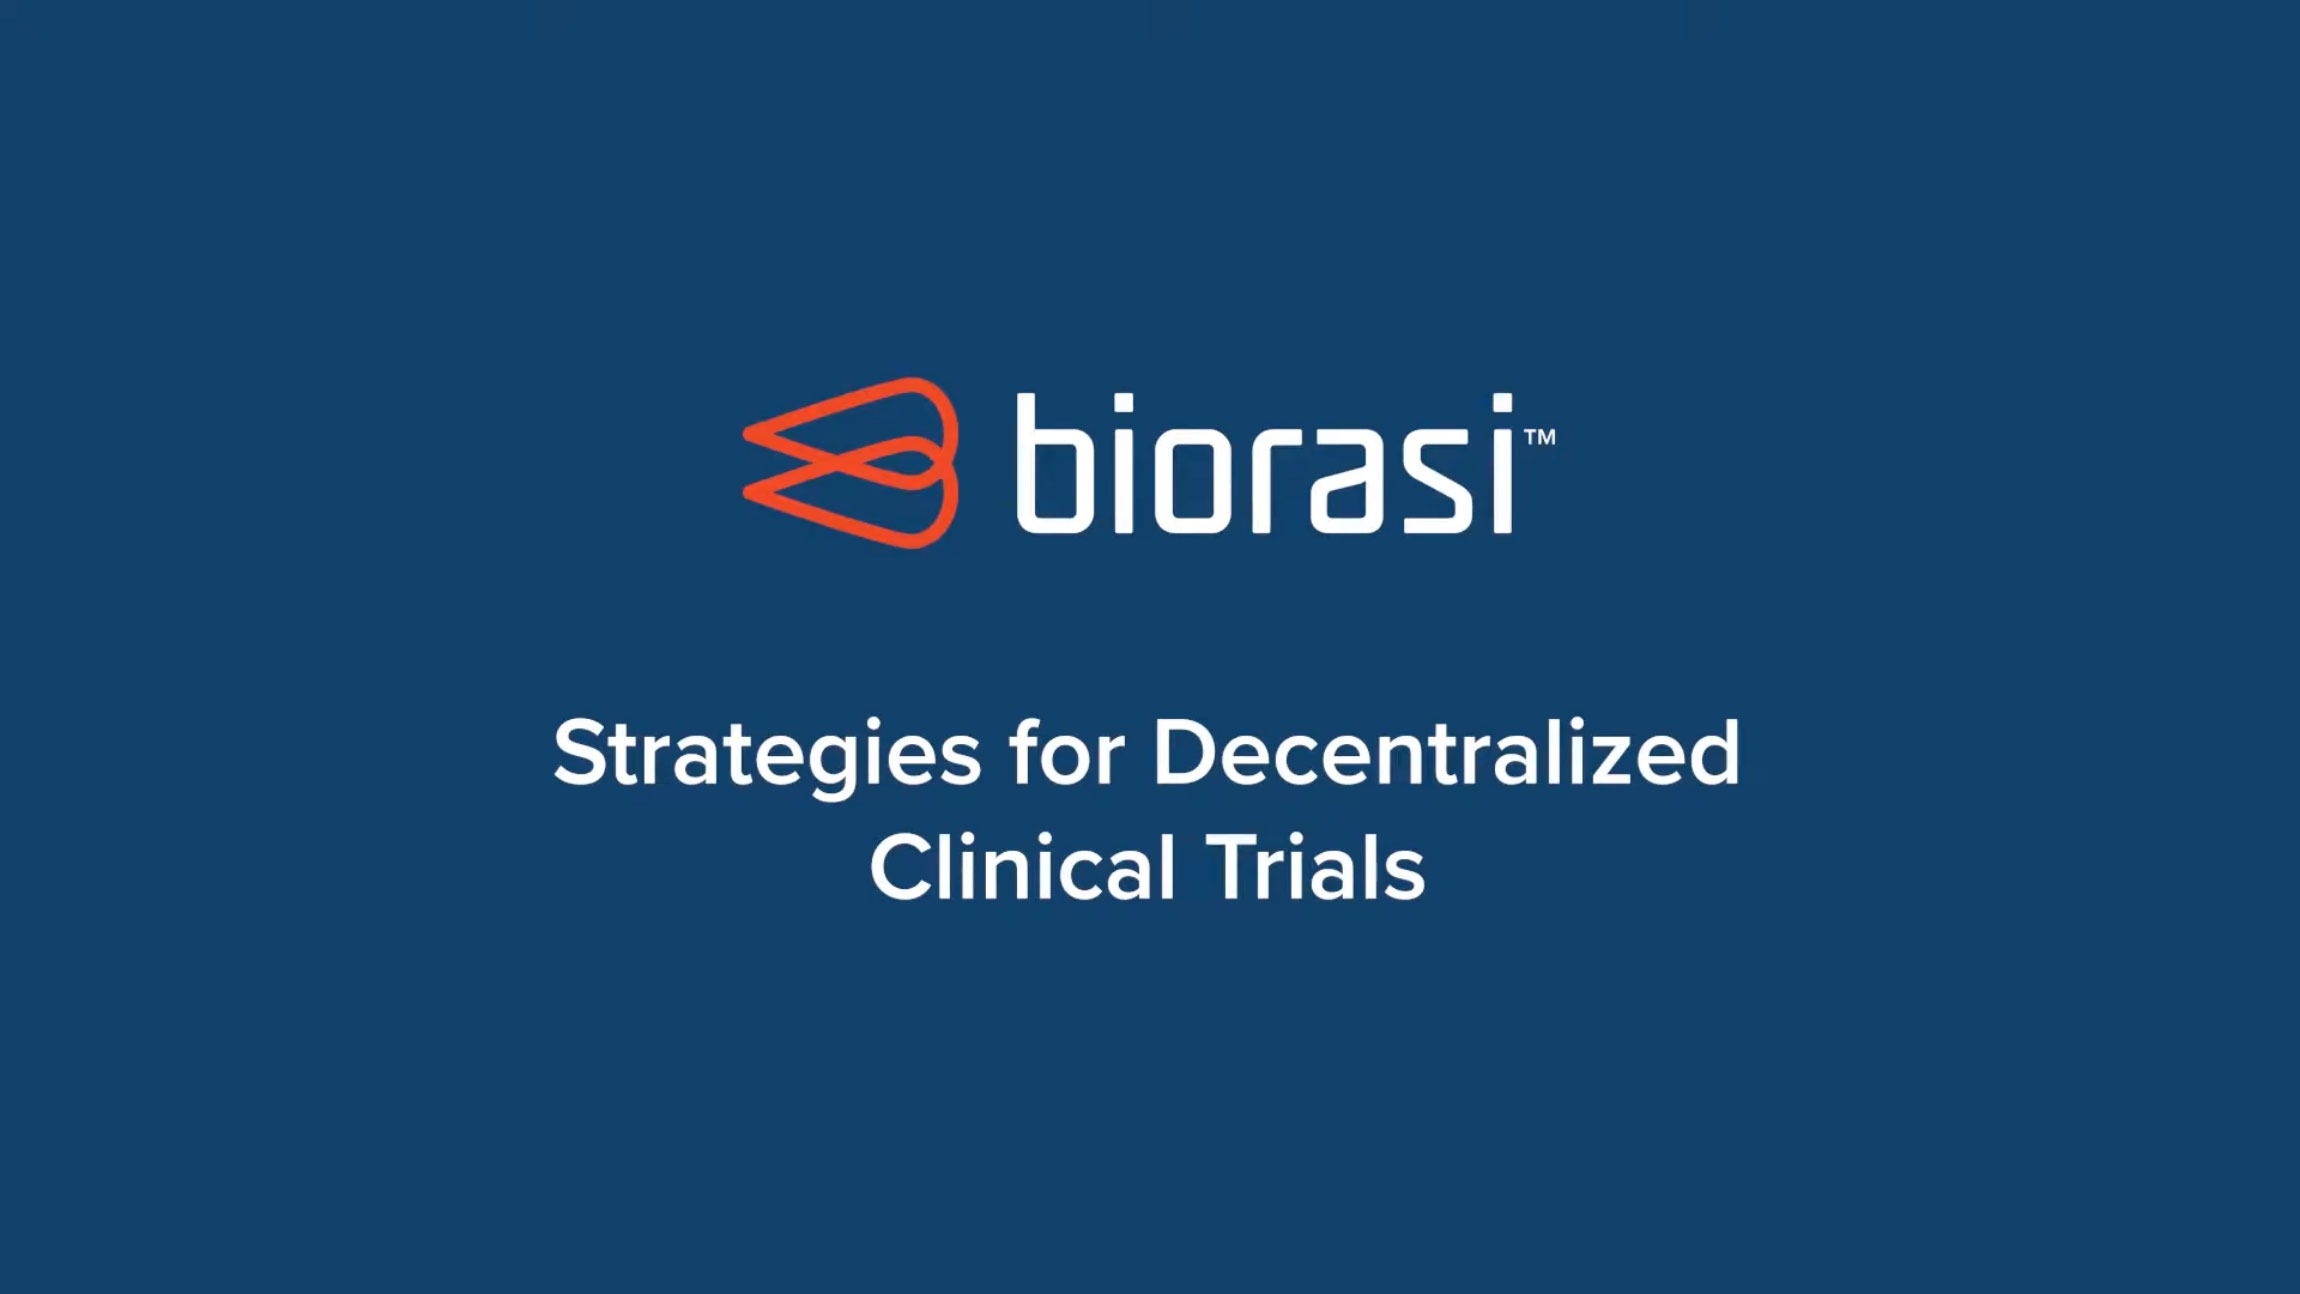 Strategies-for-Decentralized-Clinical-Trials-Video-Overlay